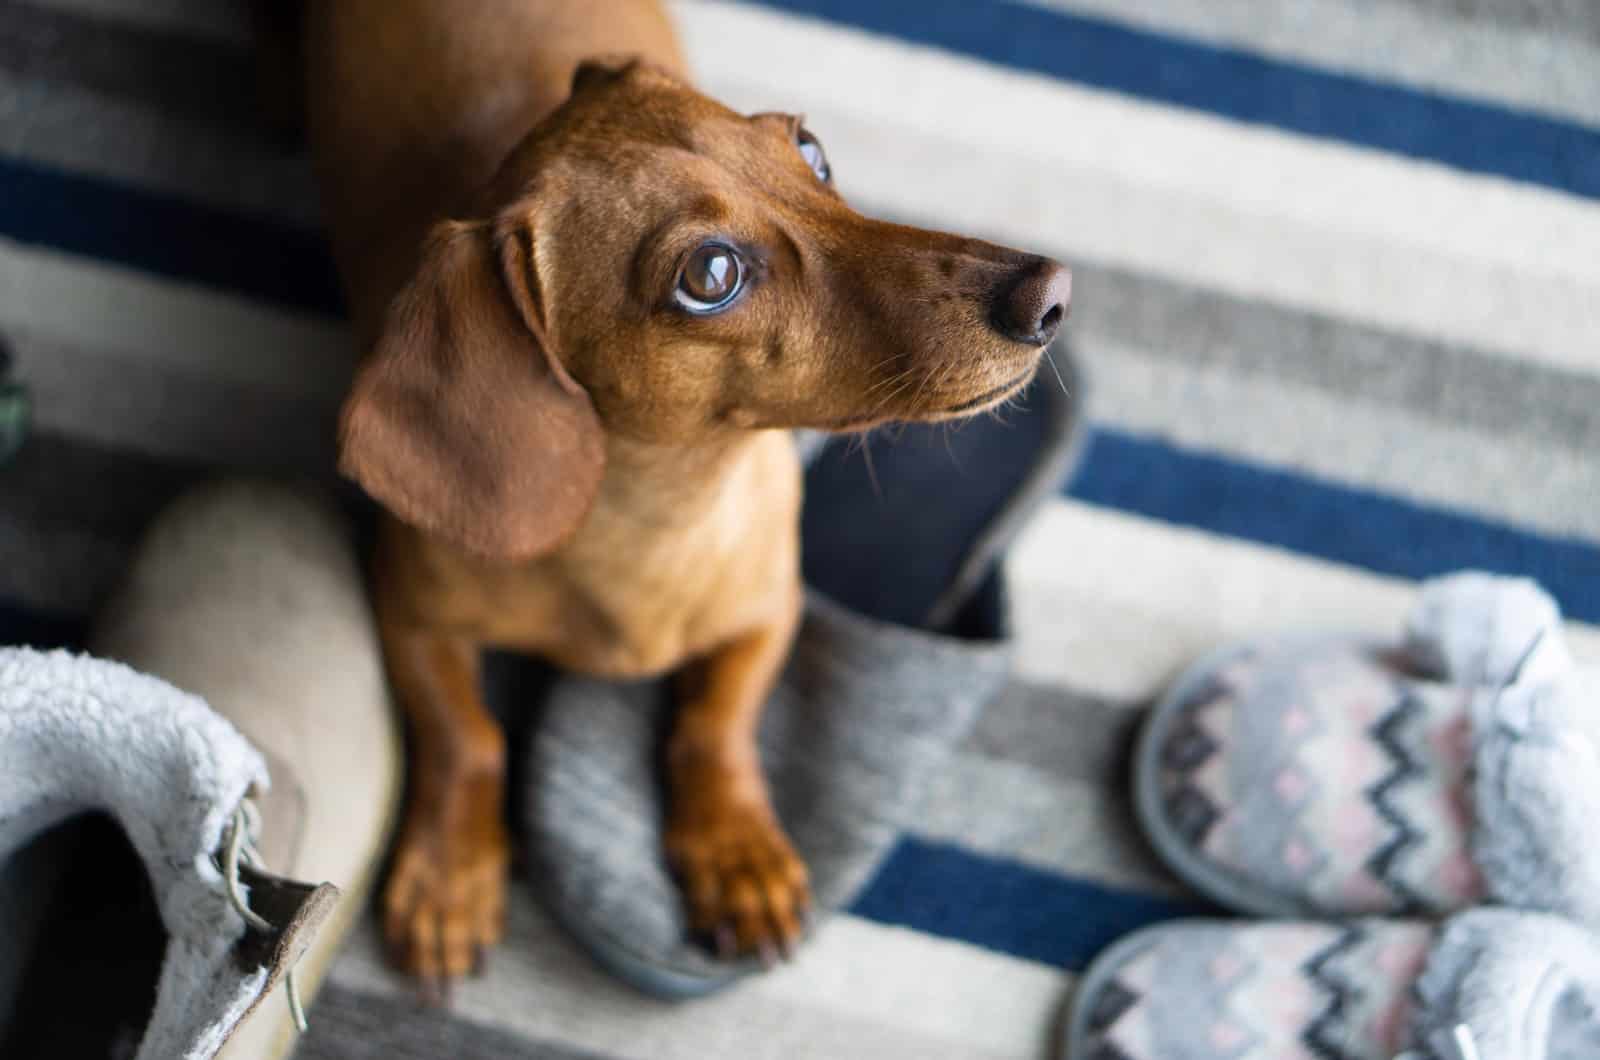 12 Best Dog Food For Dachshunds (Top Products Reviewed)